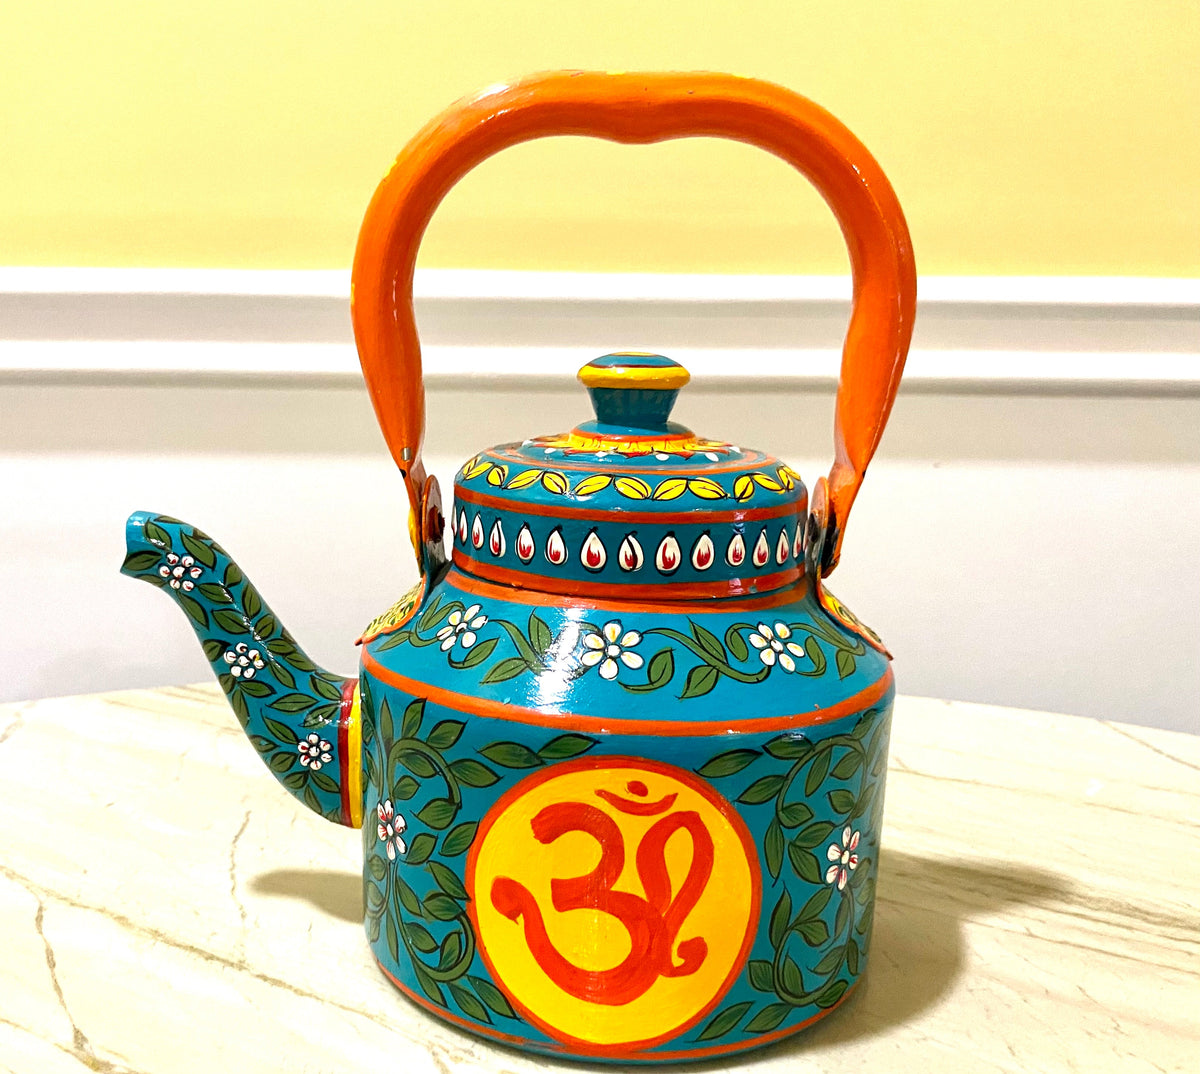 Hand Painted Stainless Steel Induction Tea Kettle om Shanti